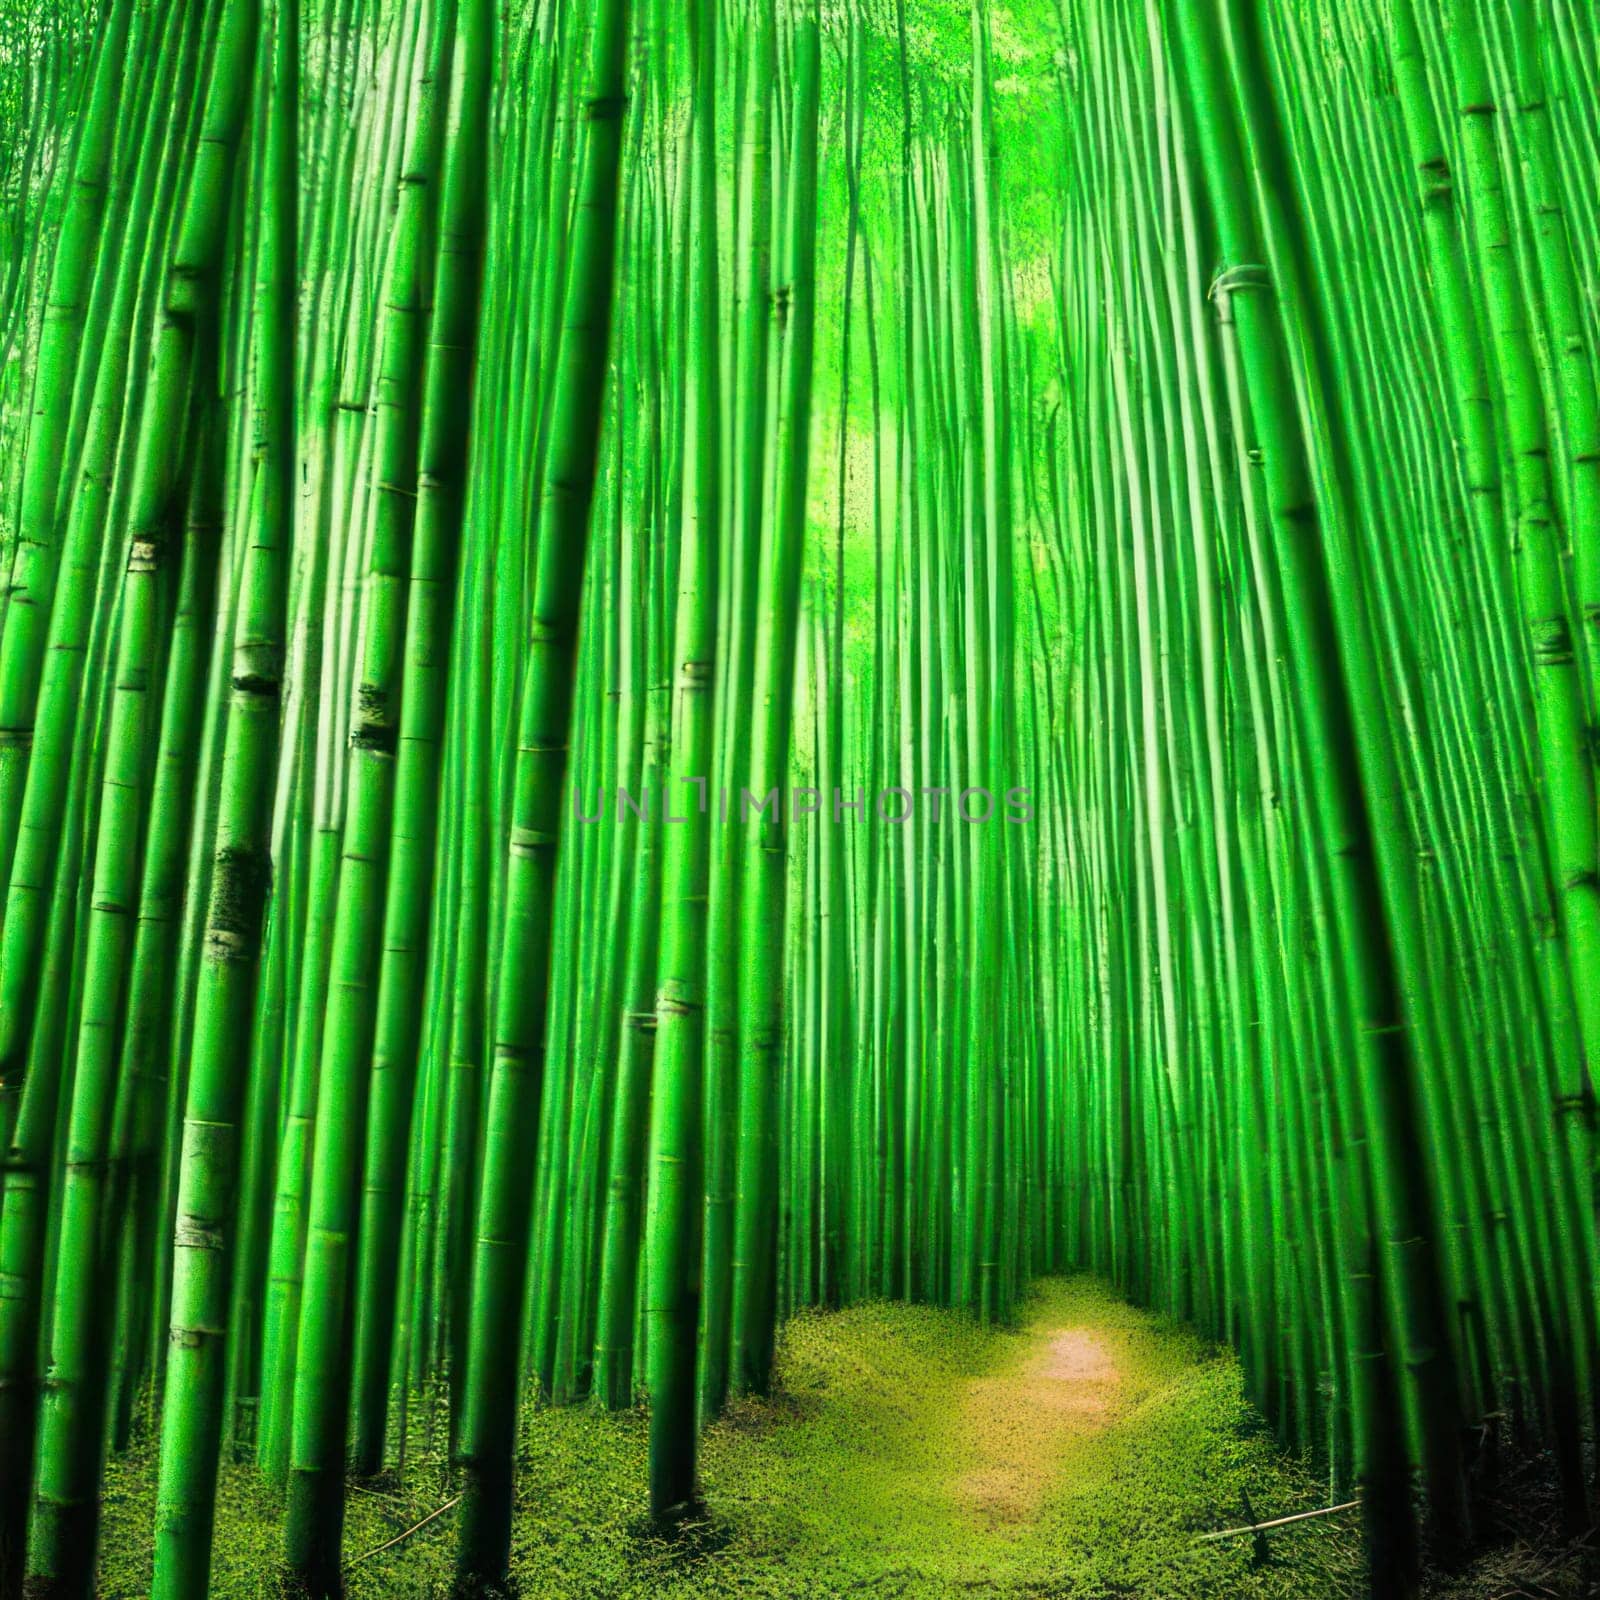 Bamboo forest. Image created by AI